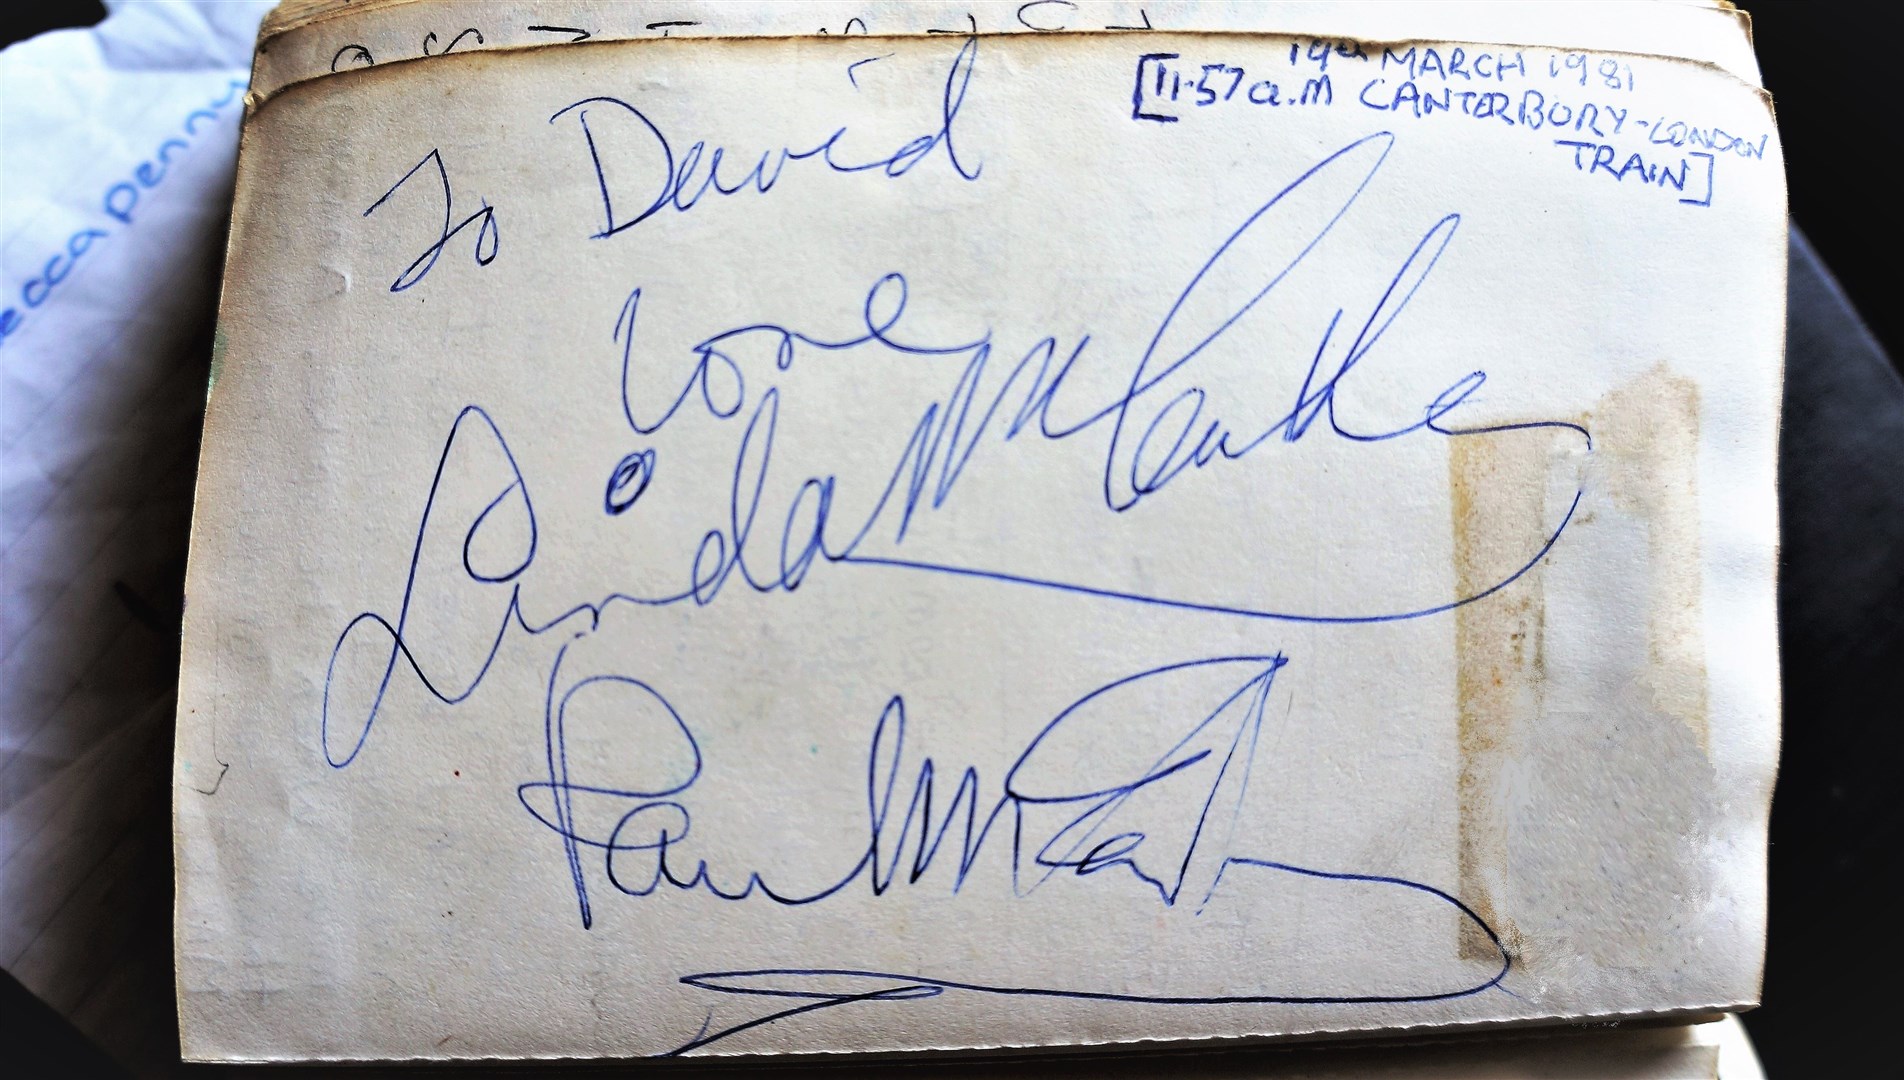 The autographs of Paul and Linda McCartney when they were encountered on a train journey between Canterbury and London. It's dated March 19, 1981 at 11.57am.